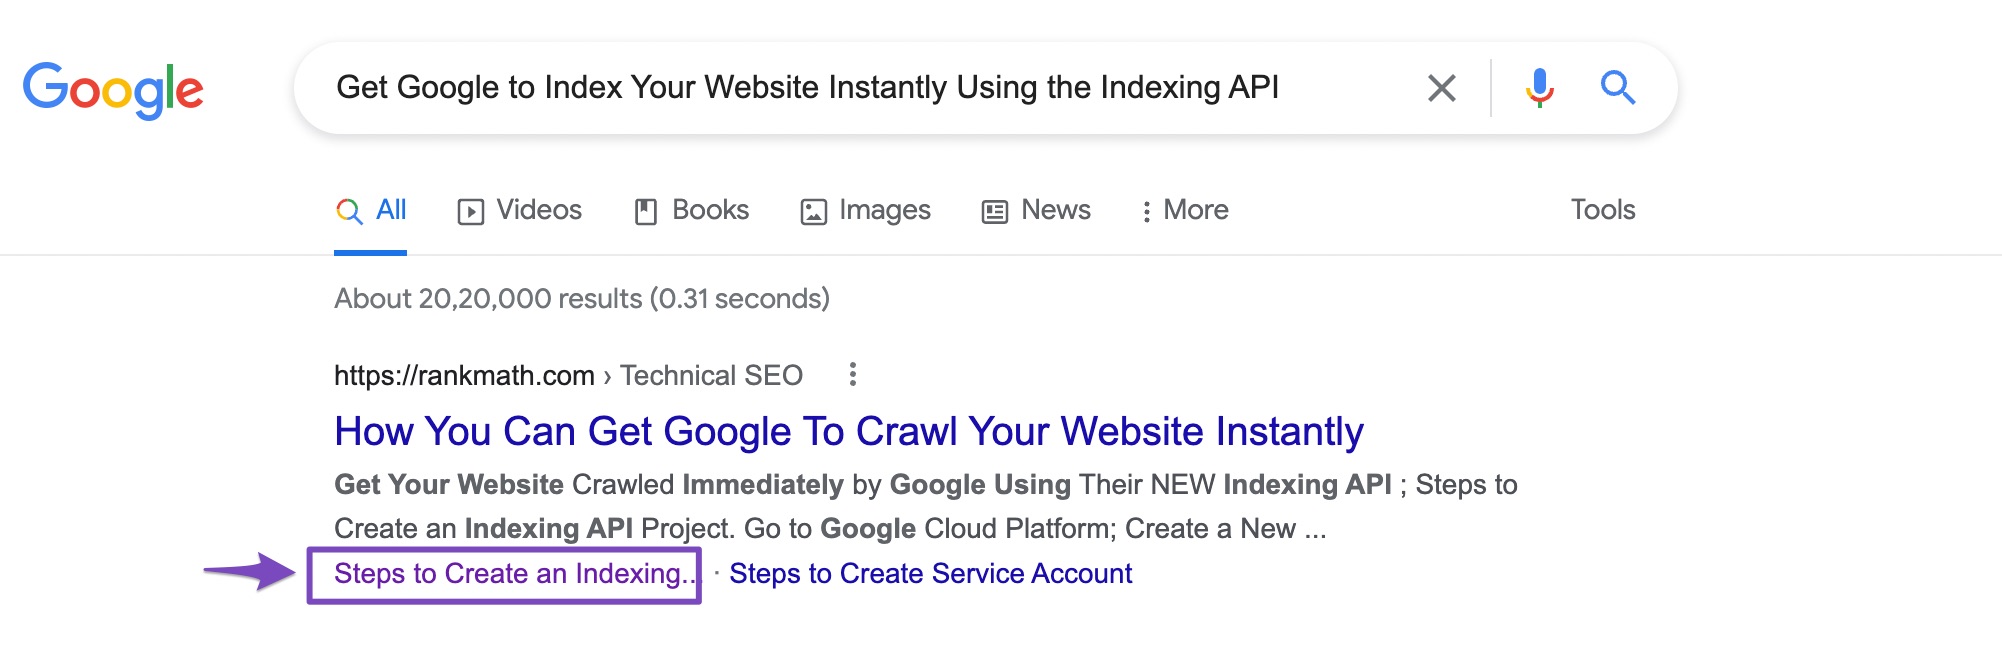 Google's Featured Snippet using Indexing API